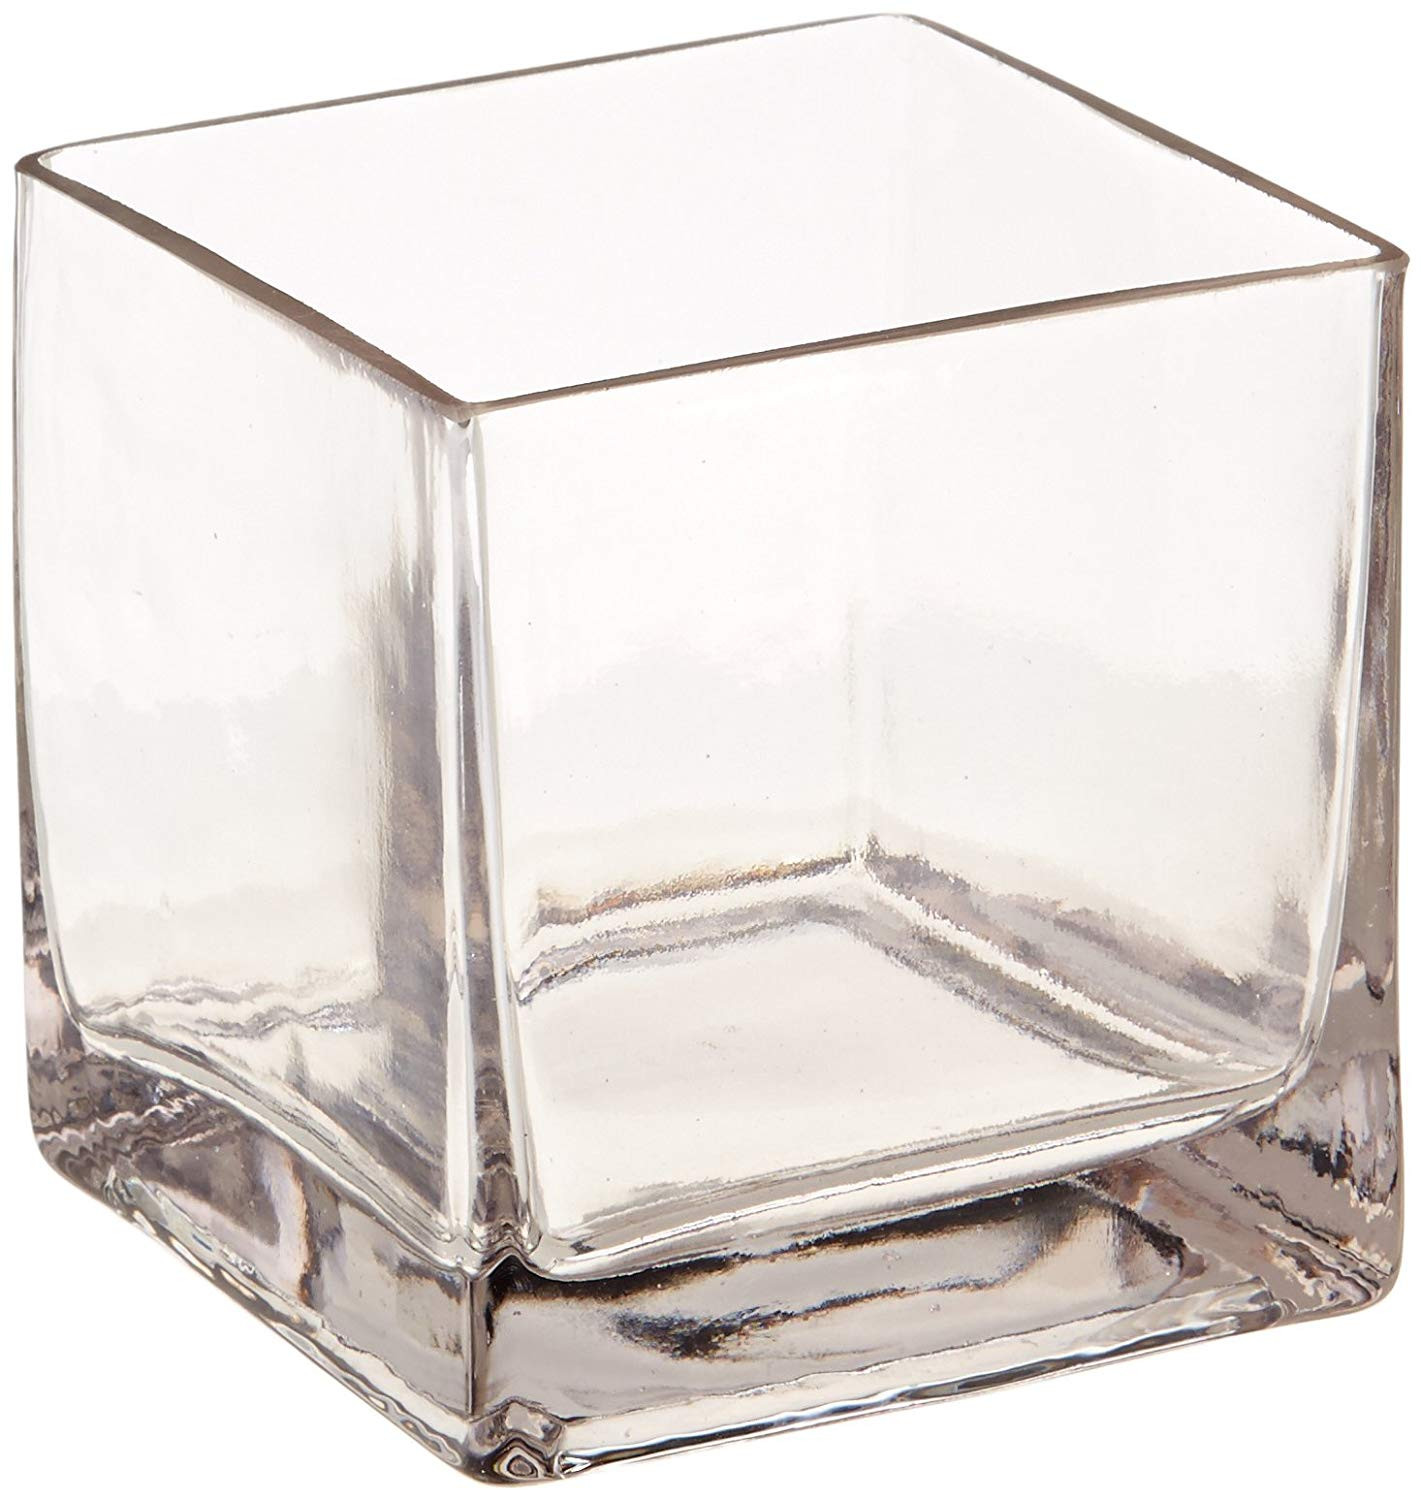 15 Stylish Clear Plastic Vases for Centerpieces 2024 free download clear plastic vases for centerpieces of amazon com 12piece 4 square crystal clear glass vase home kitchen regarding 71 jezfmvnl sl1500